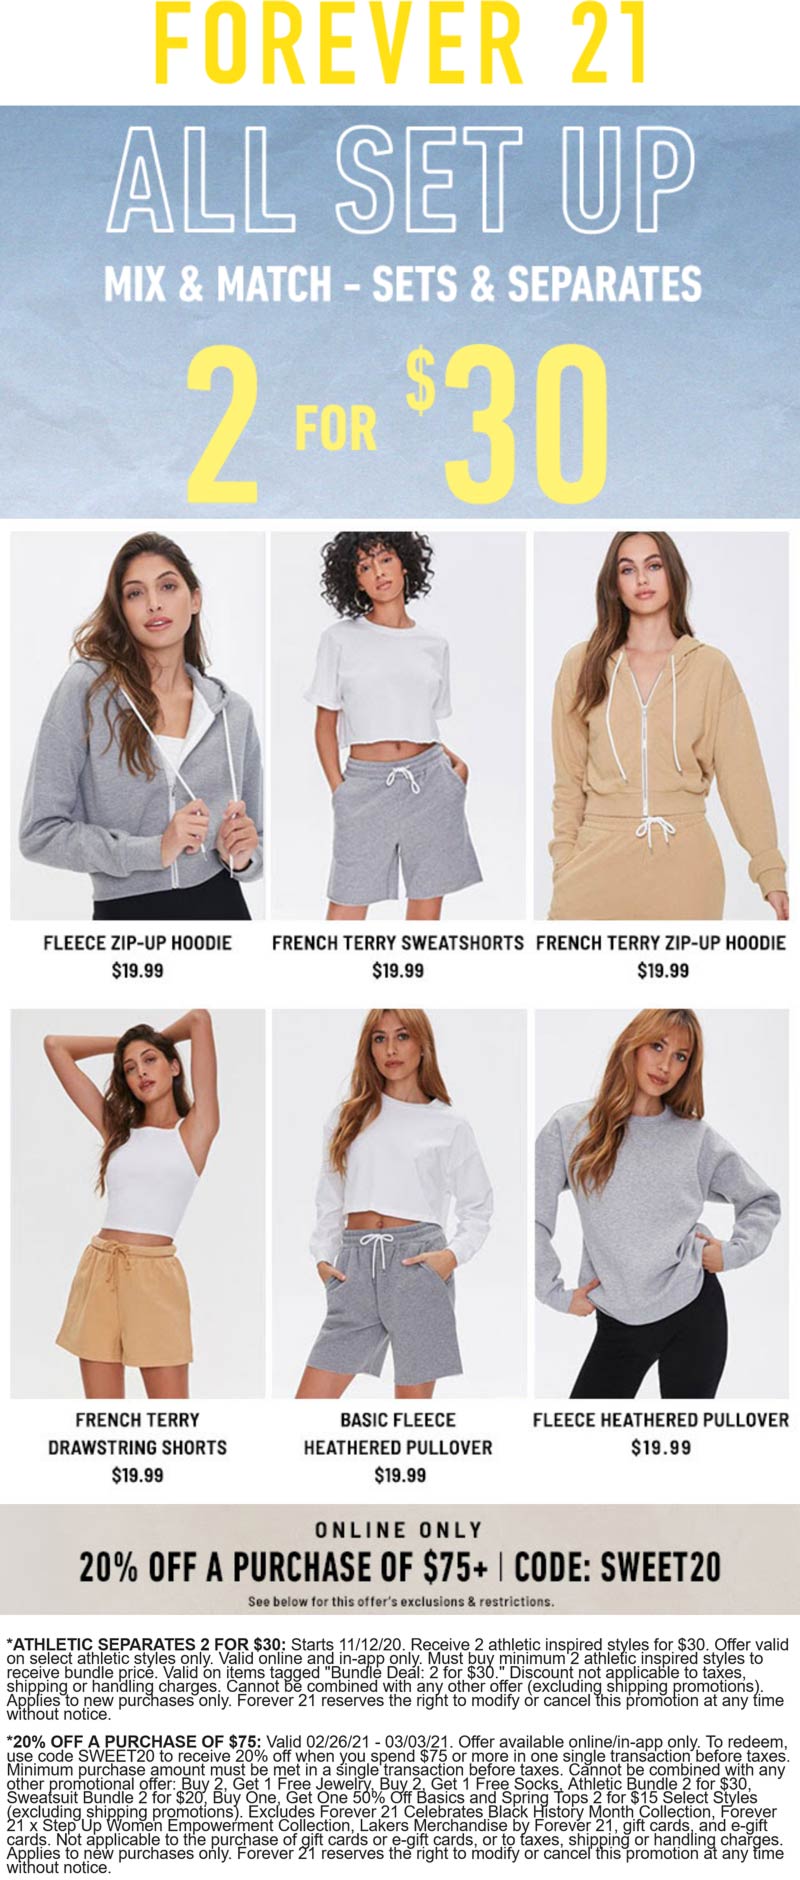 Forever 21 stores Coupon  20% off $75 at Forever 21 via promo code SWEET20 #forever21 